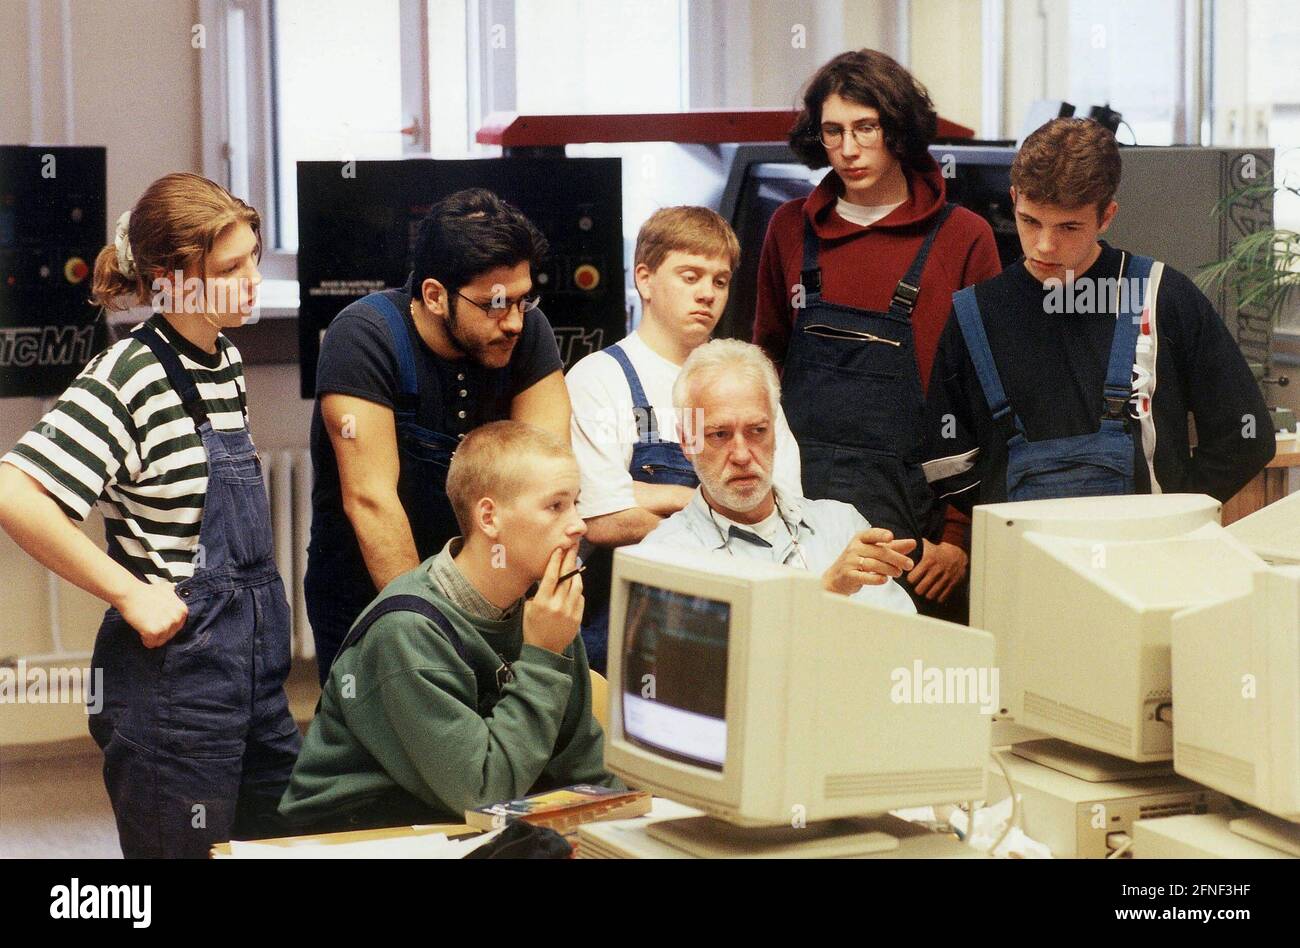 New training occupation: mechatronics technician. From September 98, trainees can learn the profession of mechatronics technician as a mixture between electronics technician and mechanic.nHere: Mechatronics technician training at the Osram plant in Berlin. [automated translation] Stock Photo